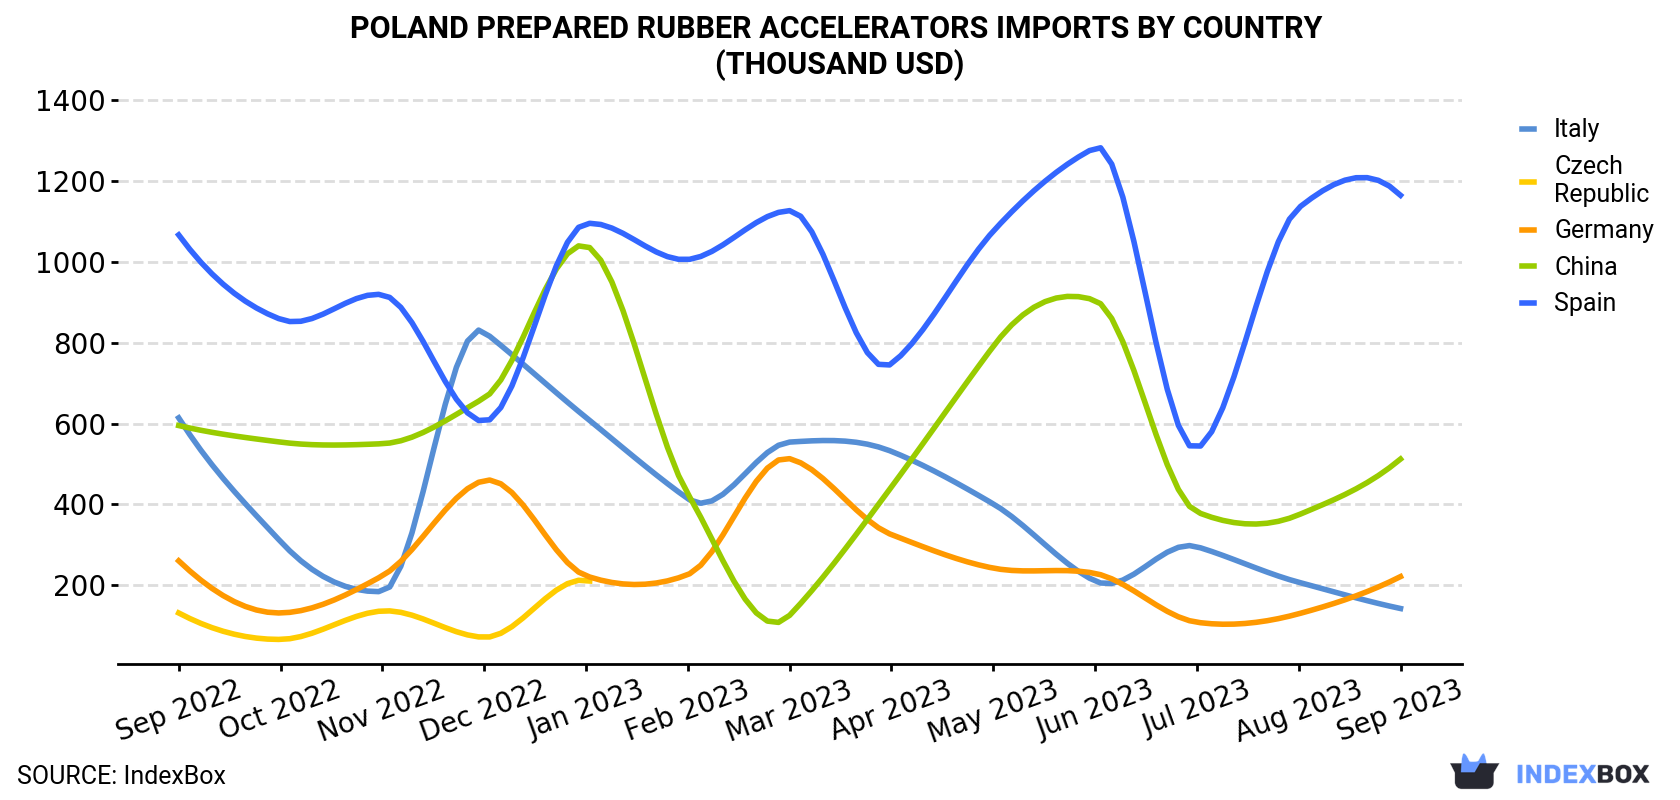 Poland Prepared Rubber Accelerators Imports By Country (Thousand USD)